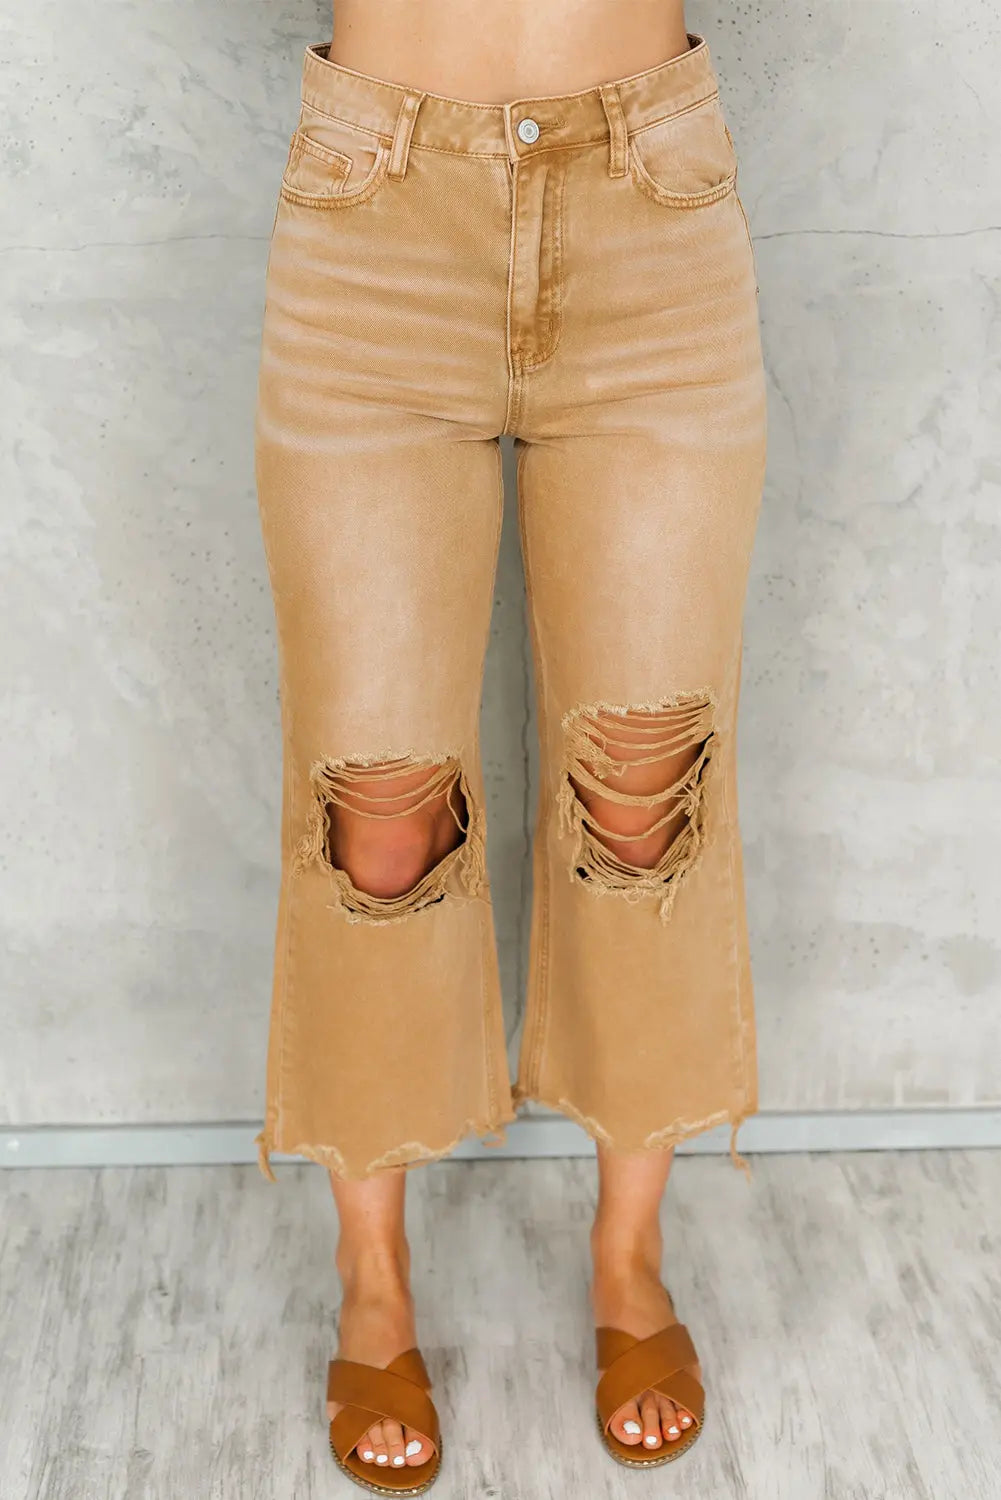 - Distressed Hollow Out High Waist Flare Jeans - 3 colors - womens jeans at TFC&H Co.